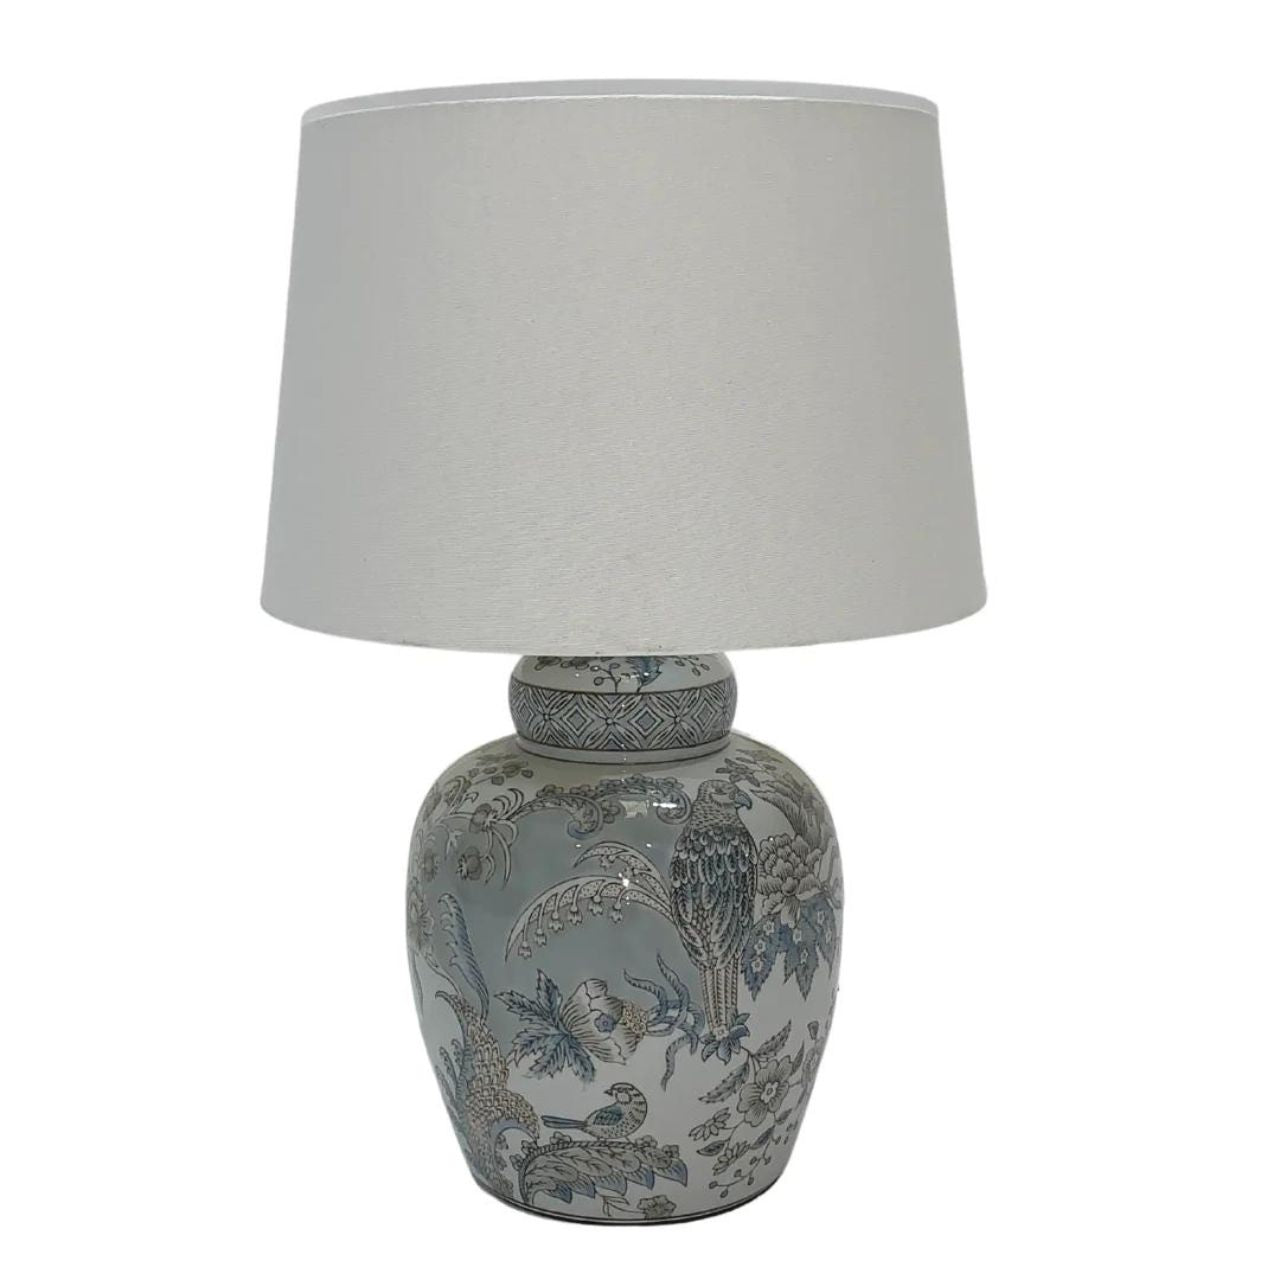 Mindy Brownes Delia Lamp Small  Good lighting is essential for every home. Our ceramic collection is traditional yet timeless and featuring stunning designs, prints and patterns bursting with colour. This lamp in light blue and grey in colour. Tropical print design. A white linen shade.